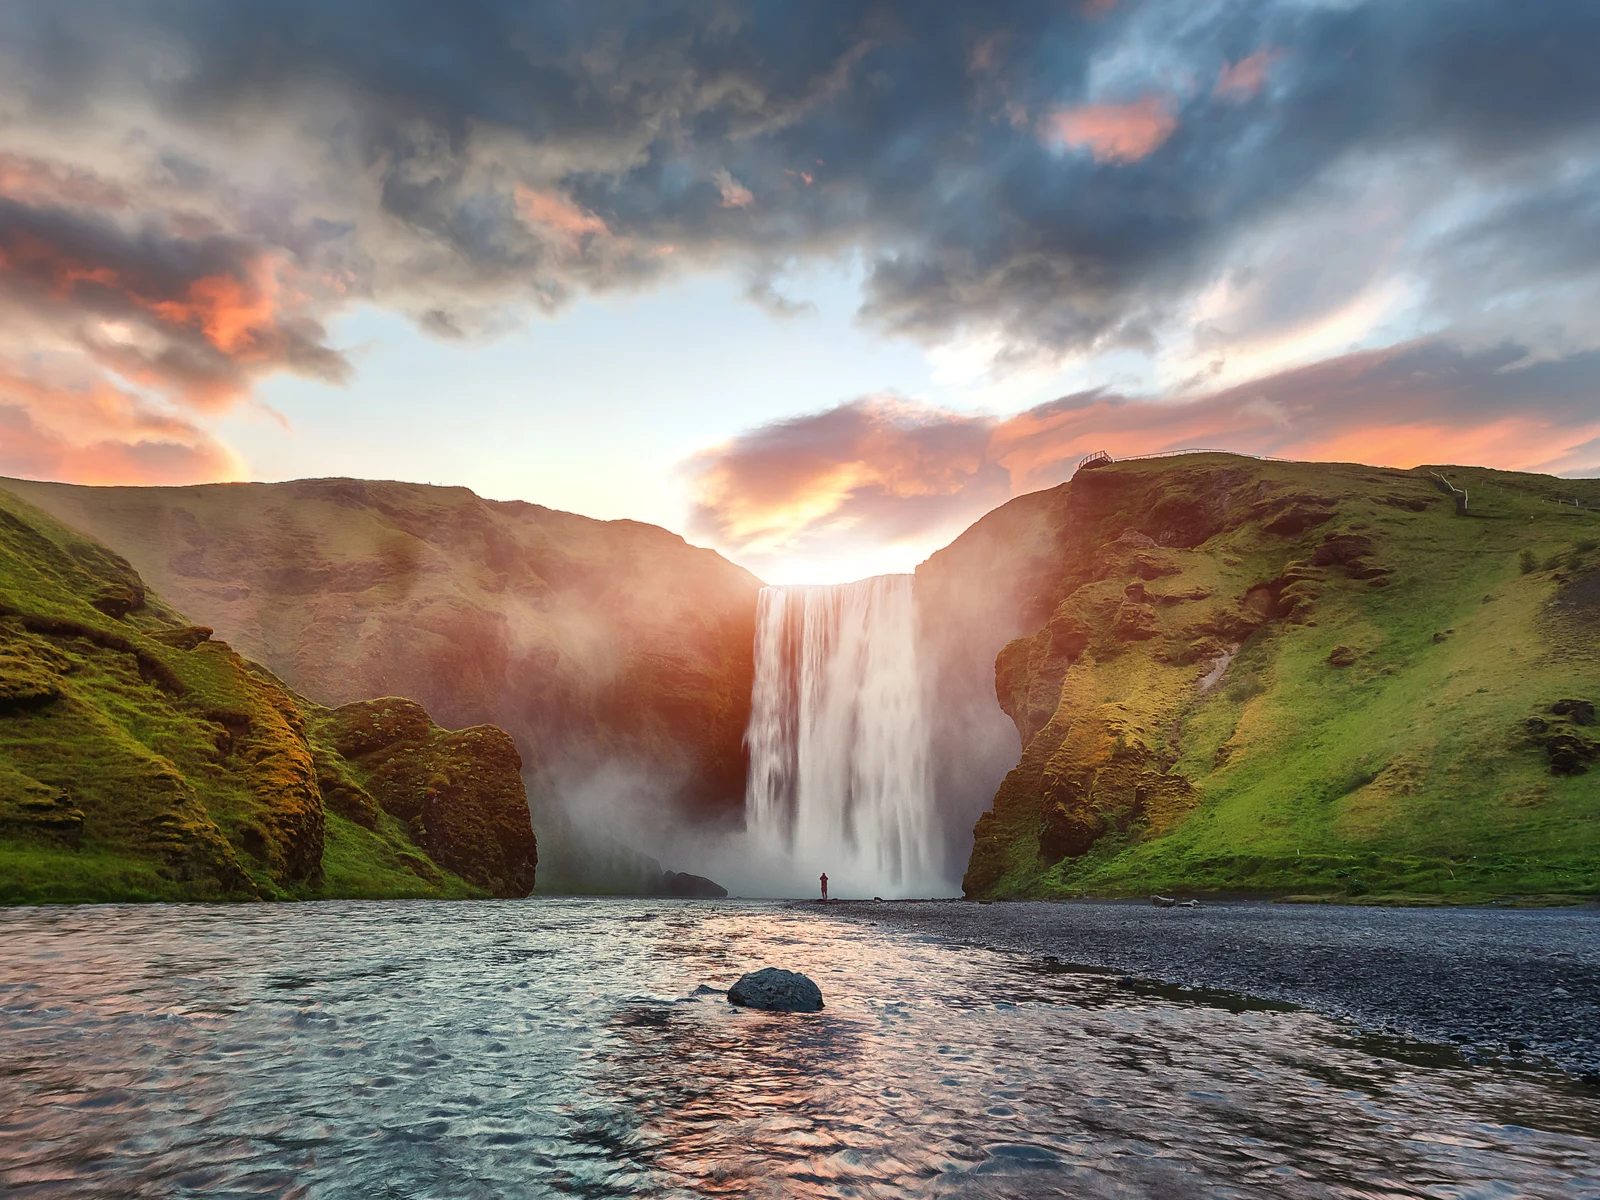 Skogafoss Waterfall as seen on one of the best hikes in Iceland at dusk with lush greenery around the falls